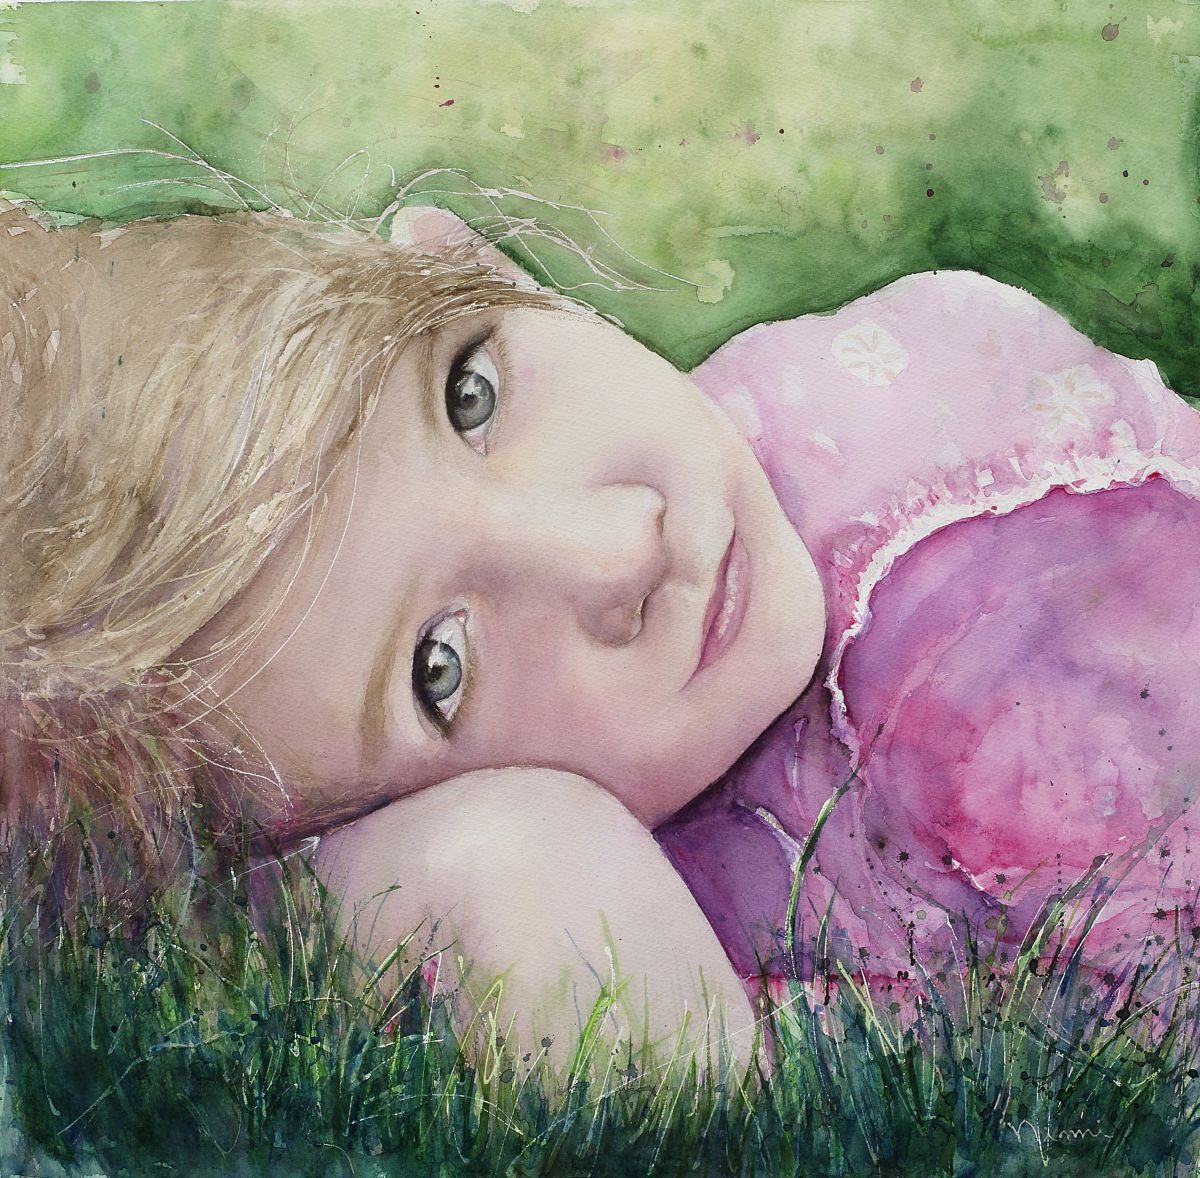 Spring by Ninni watercolors